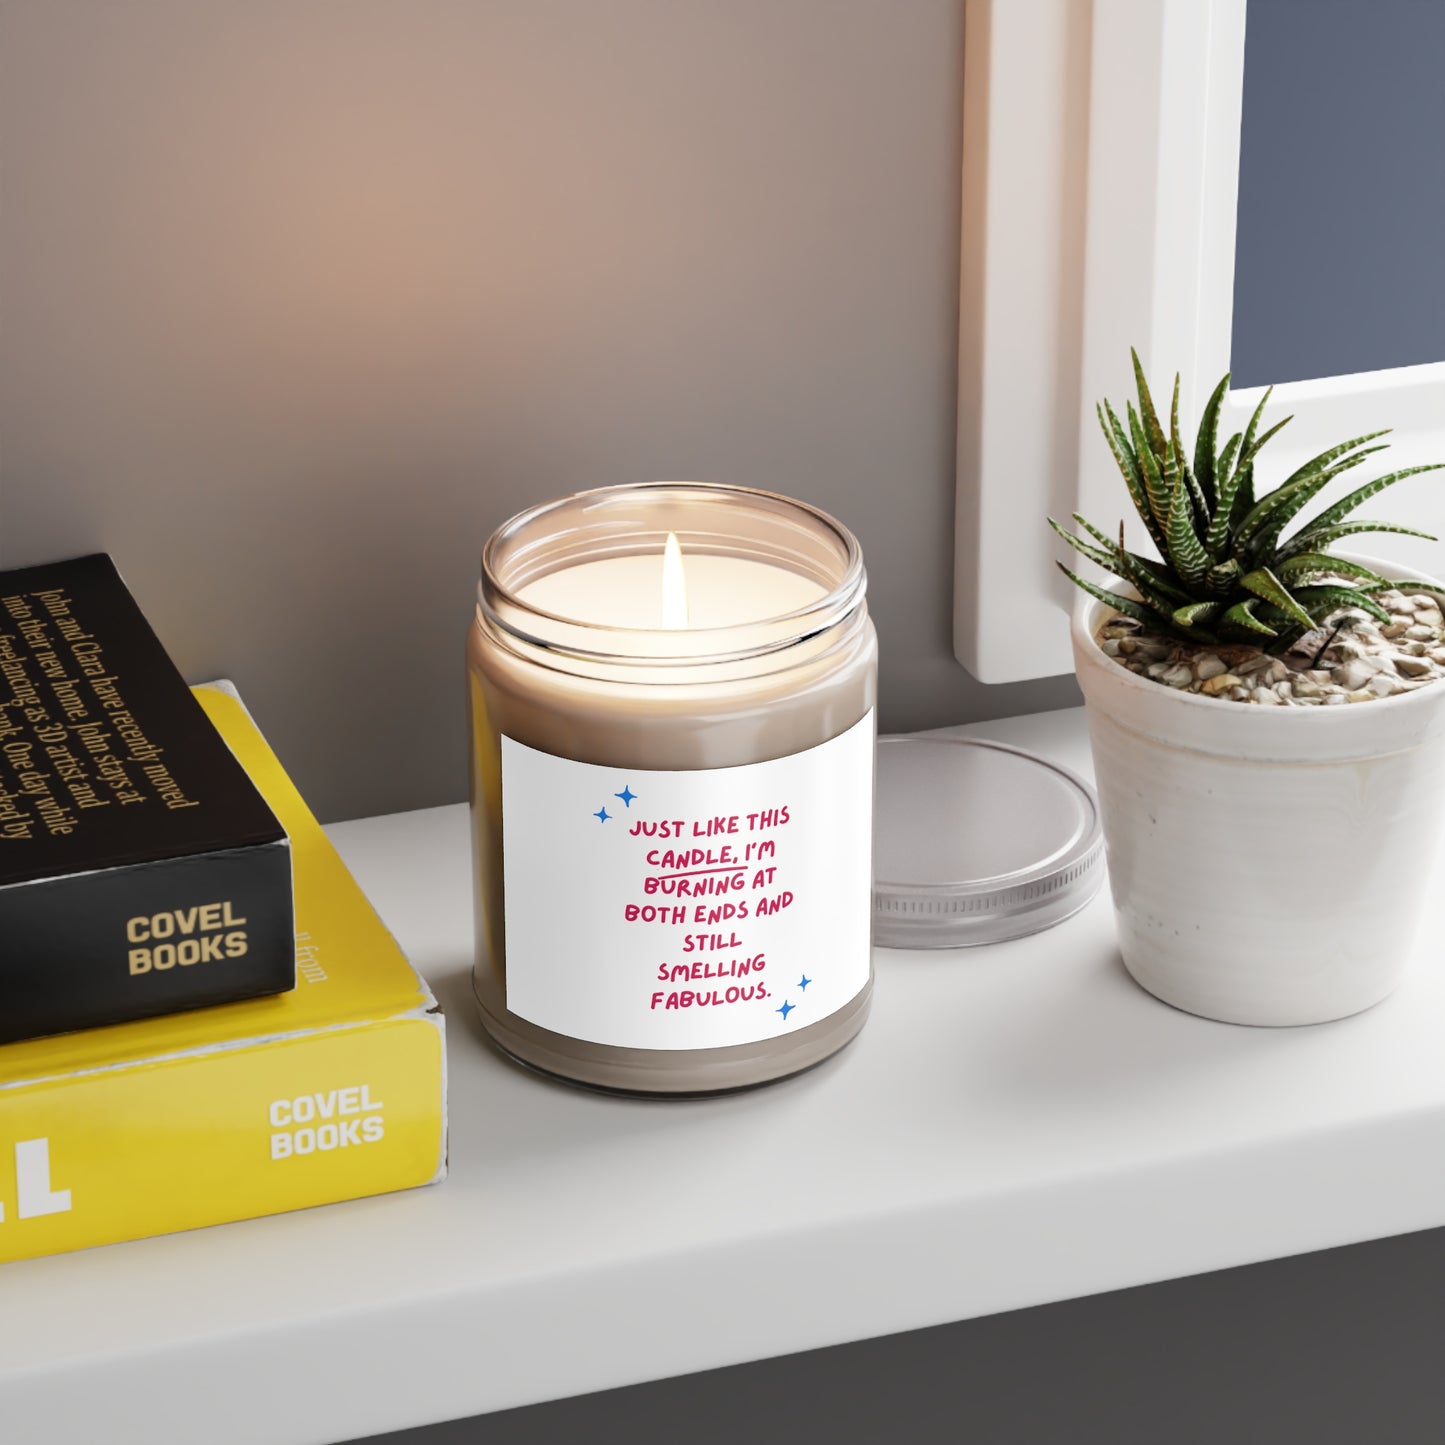 Just like this candle, I'm burning at both ends and still smelling fabulous. Scented Candles, 9oz